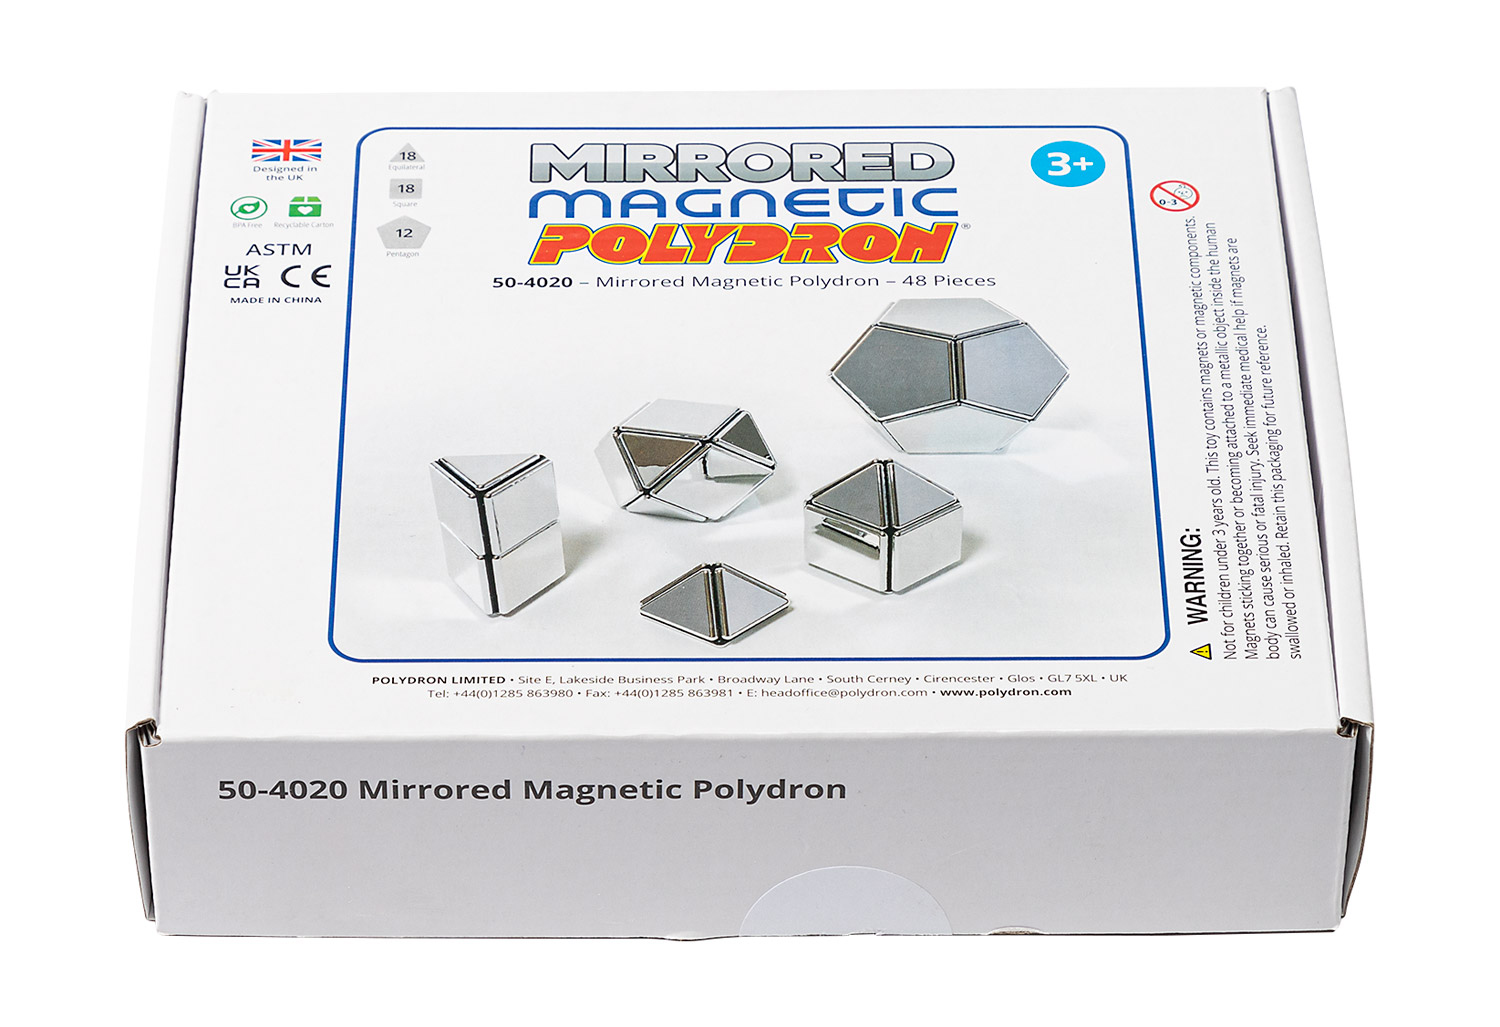 Polydron magnetic mirror